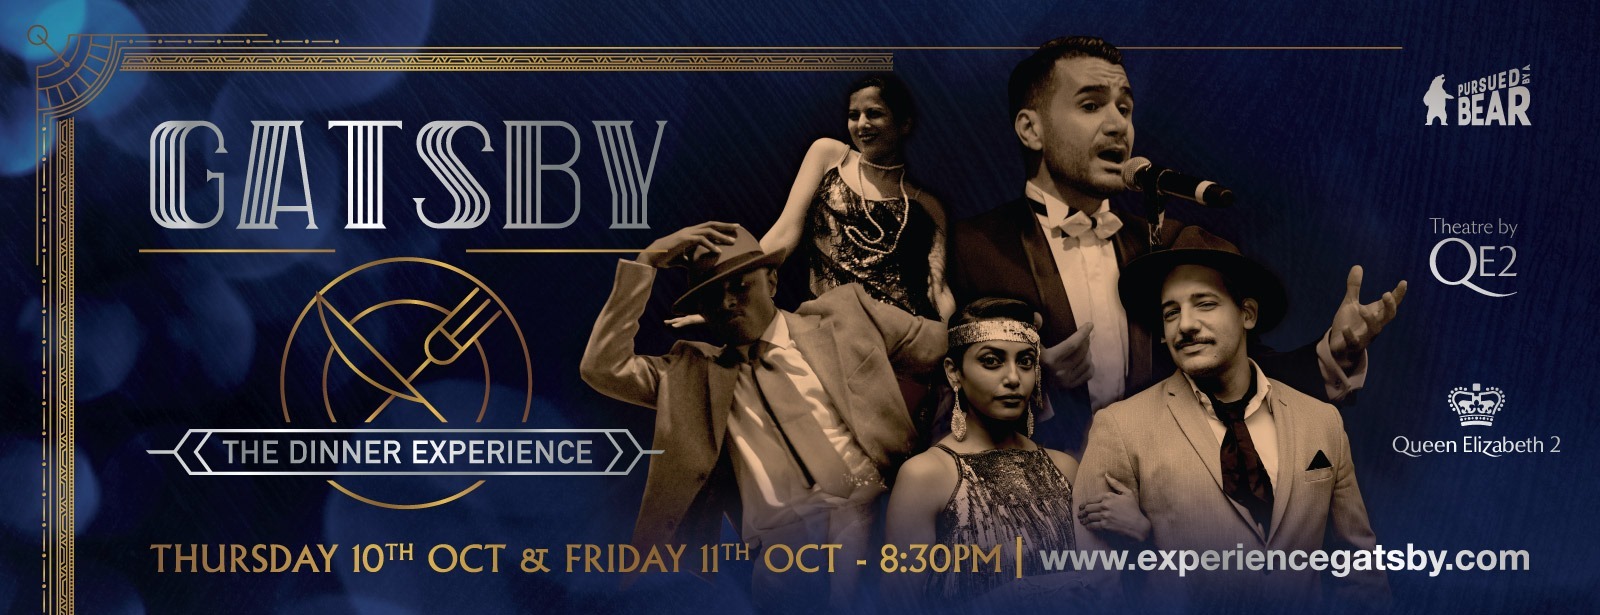 Gatsby: The Dinner Experience - Coming Soon in UAE